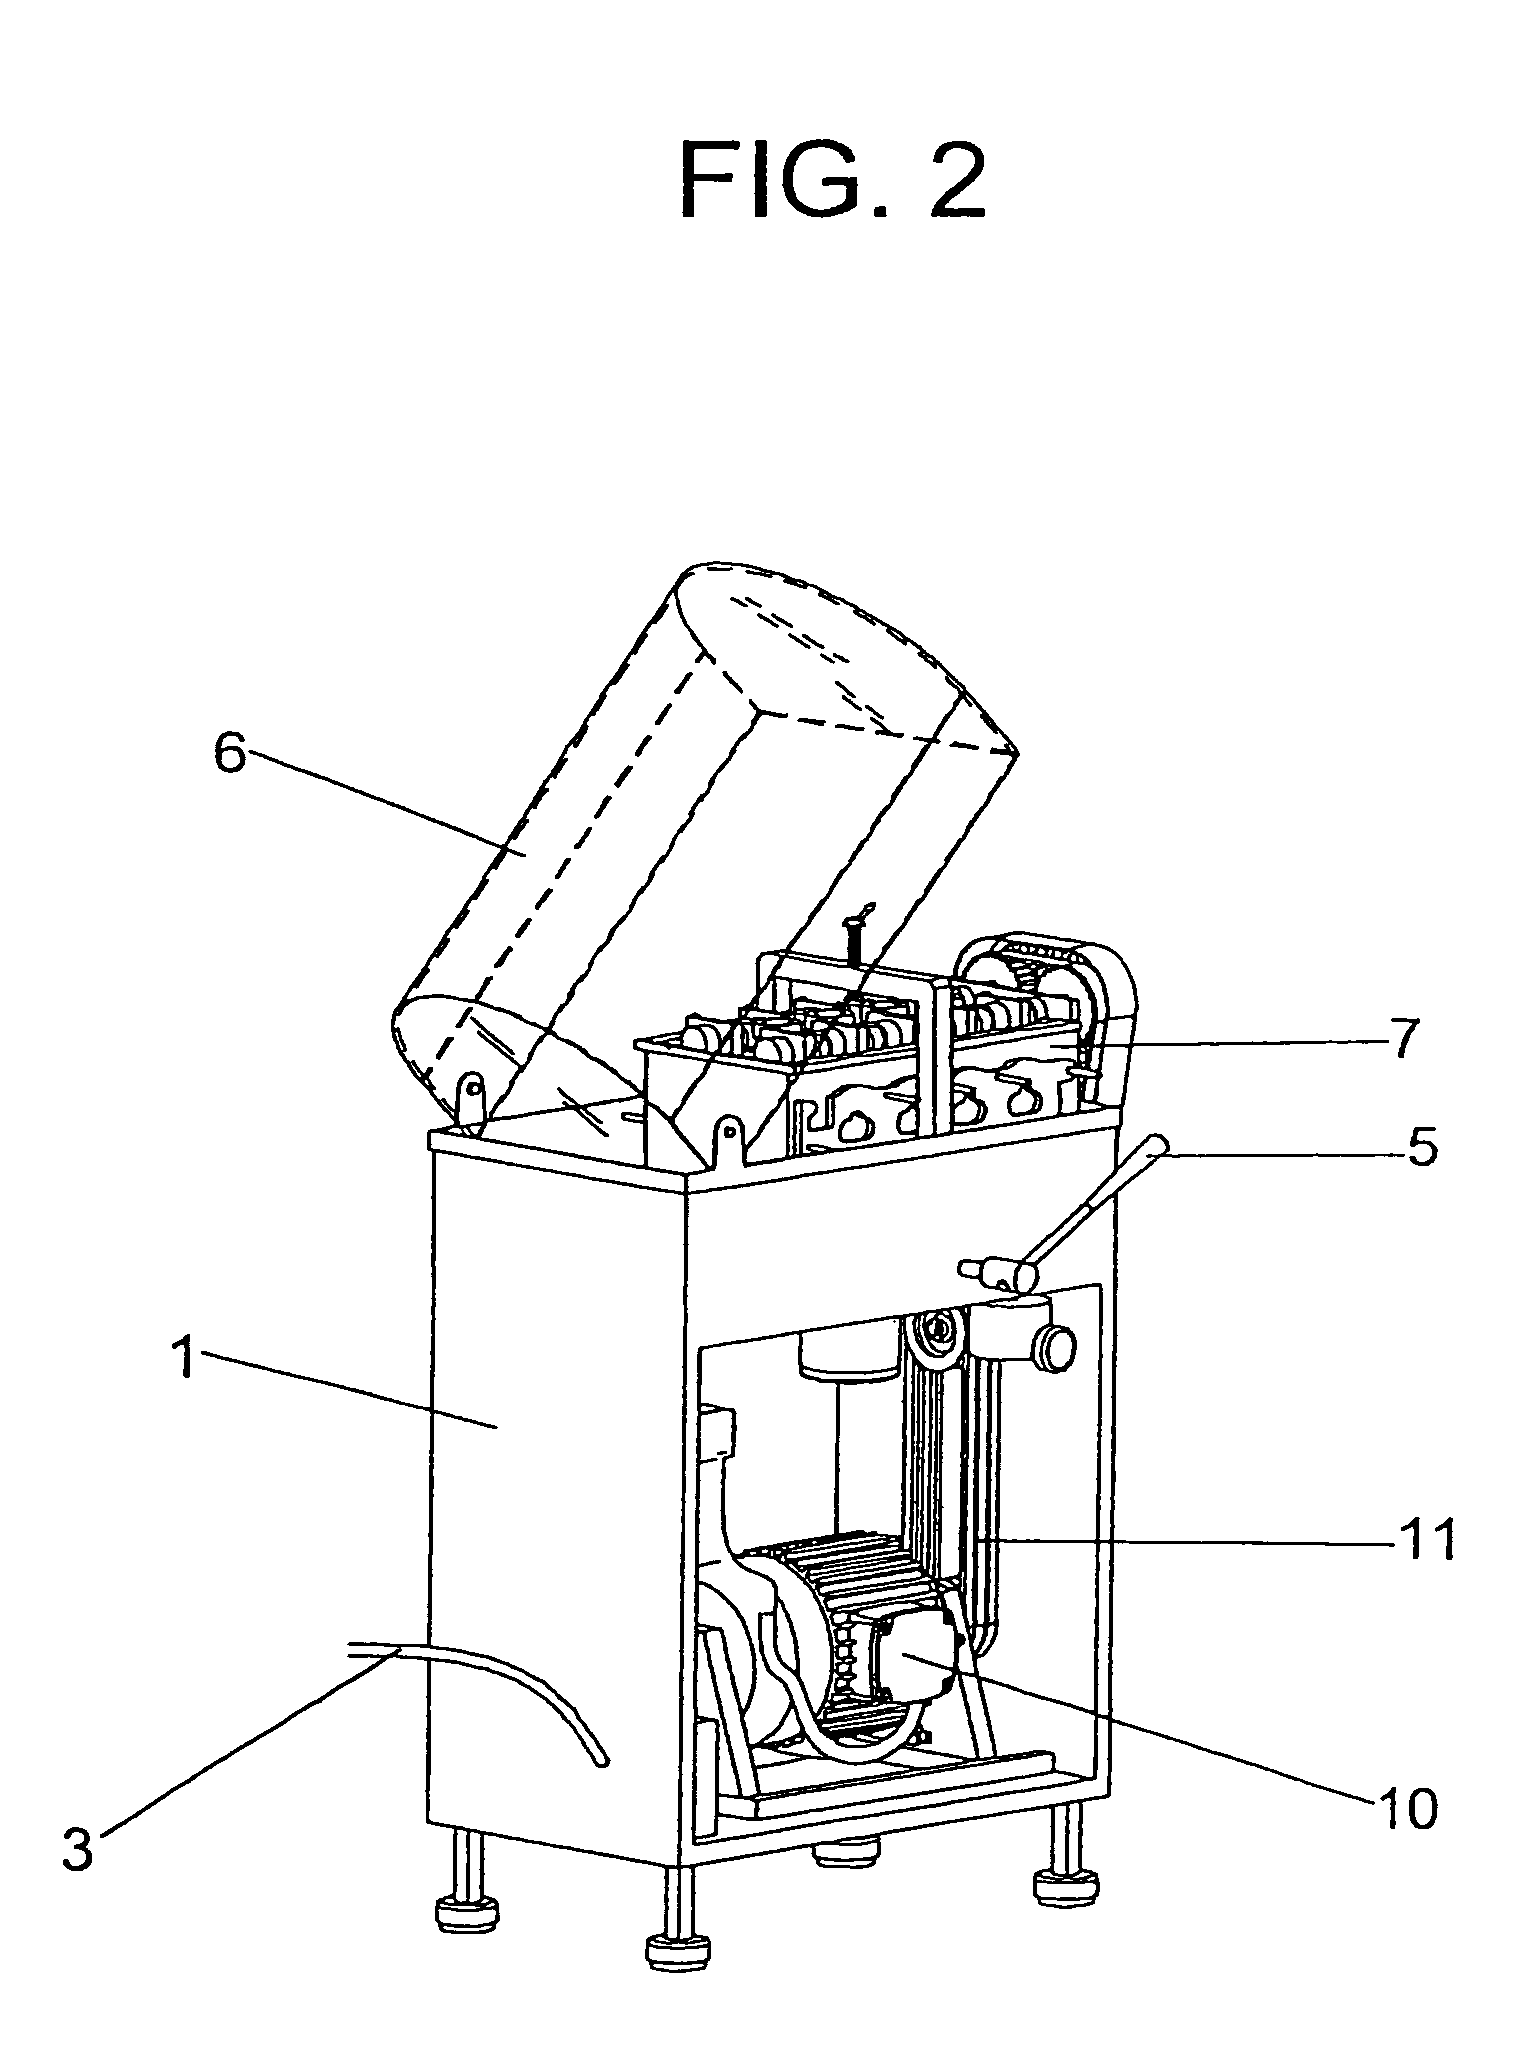 Dynamometric bench for headstocks with SOHC and DOHC type overhead camshaft for internal combustion engines